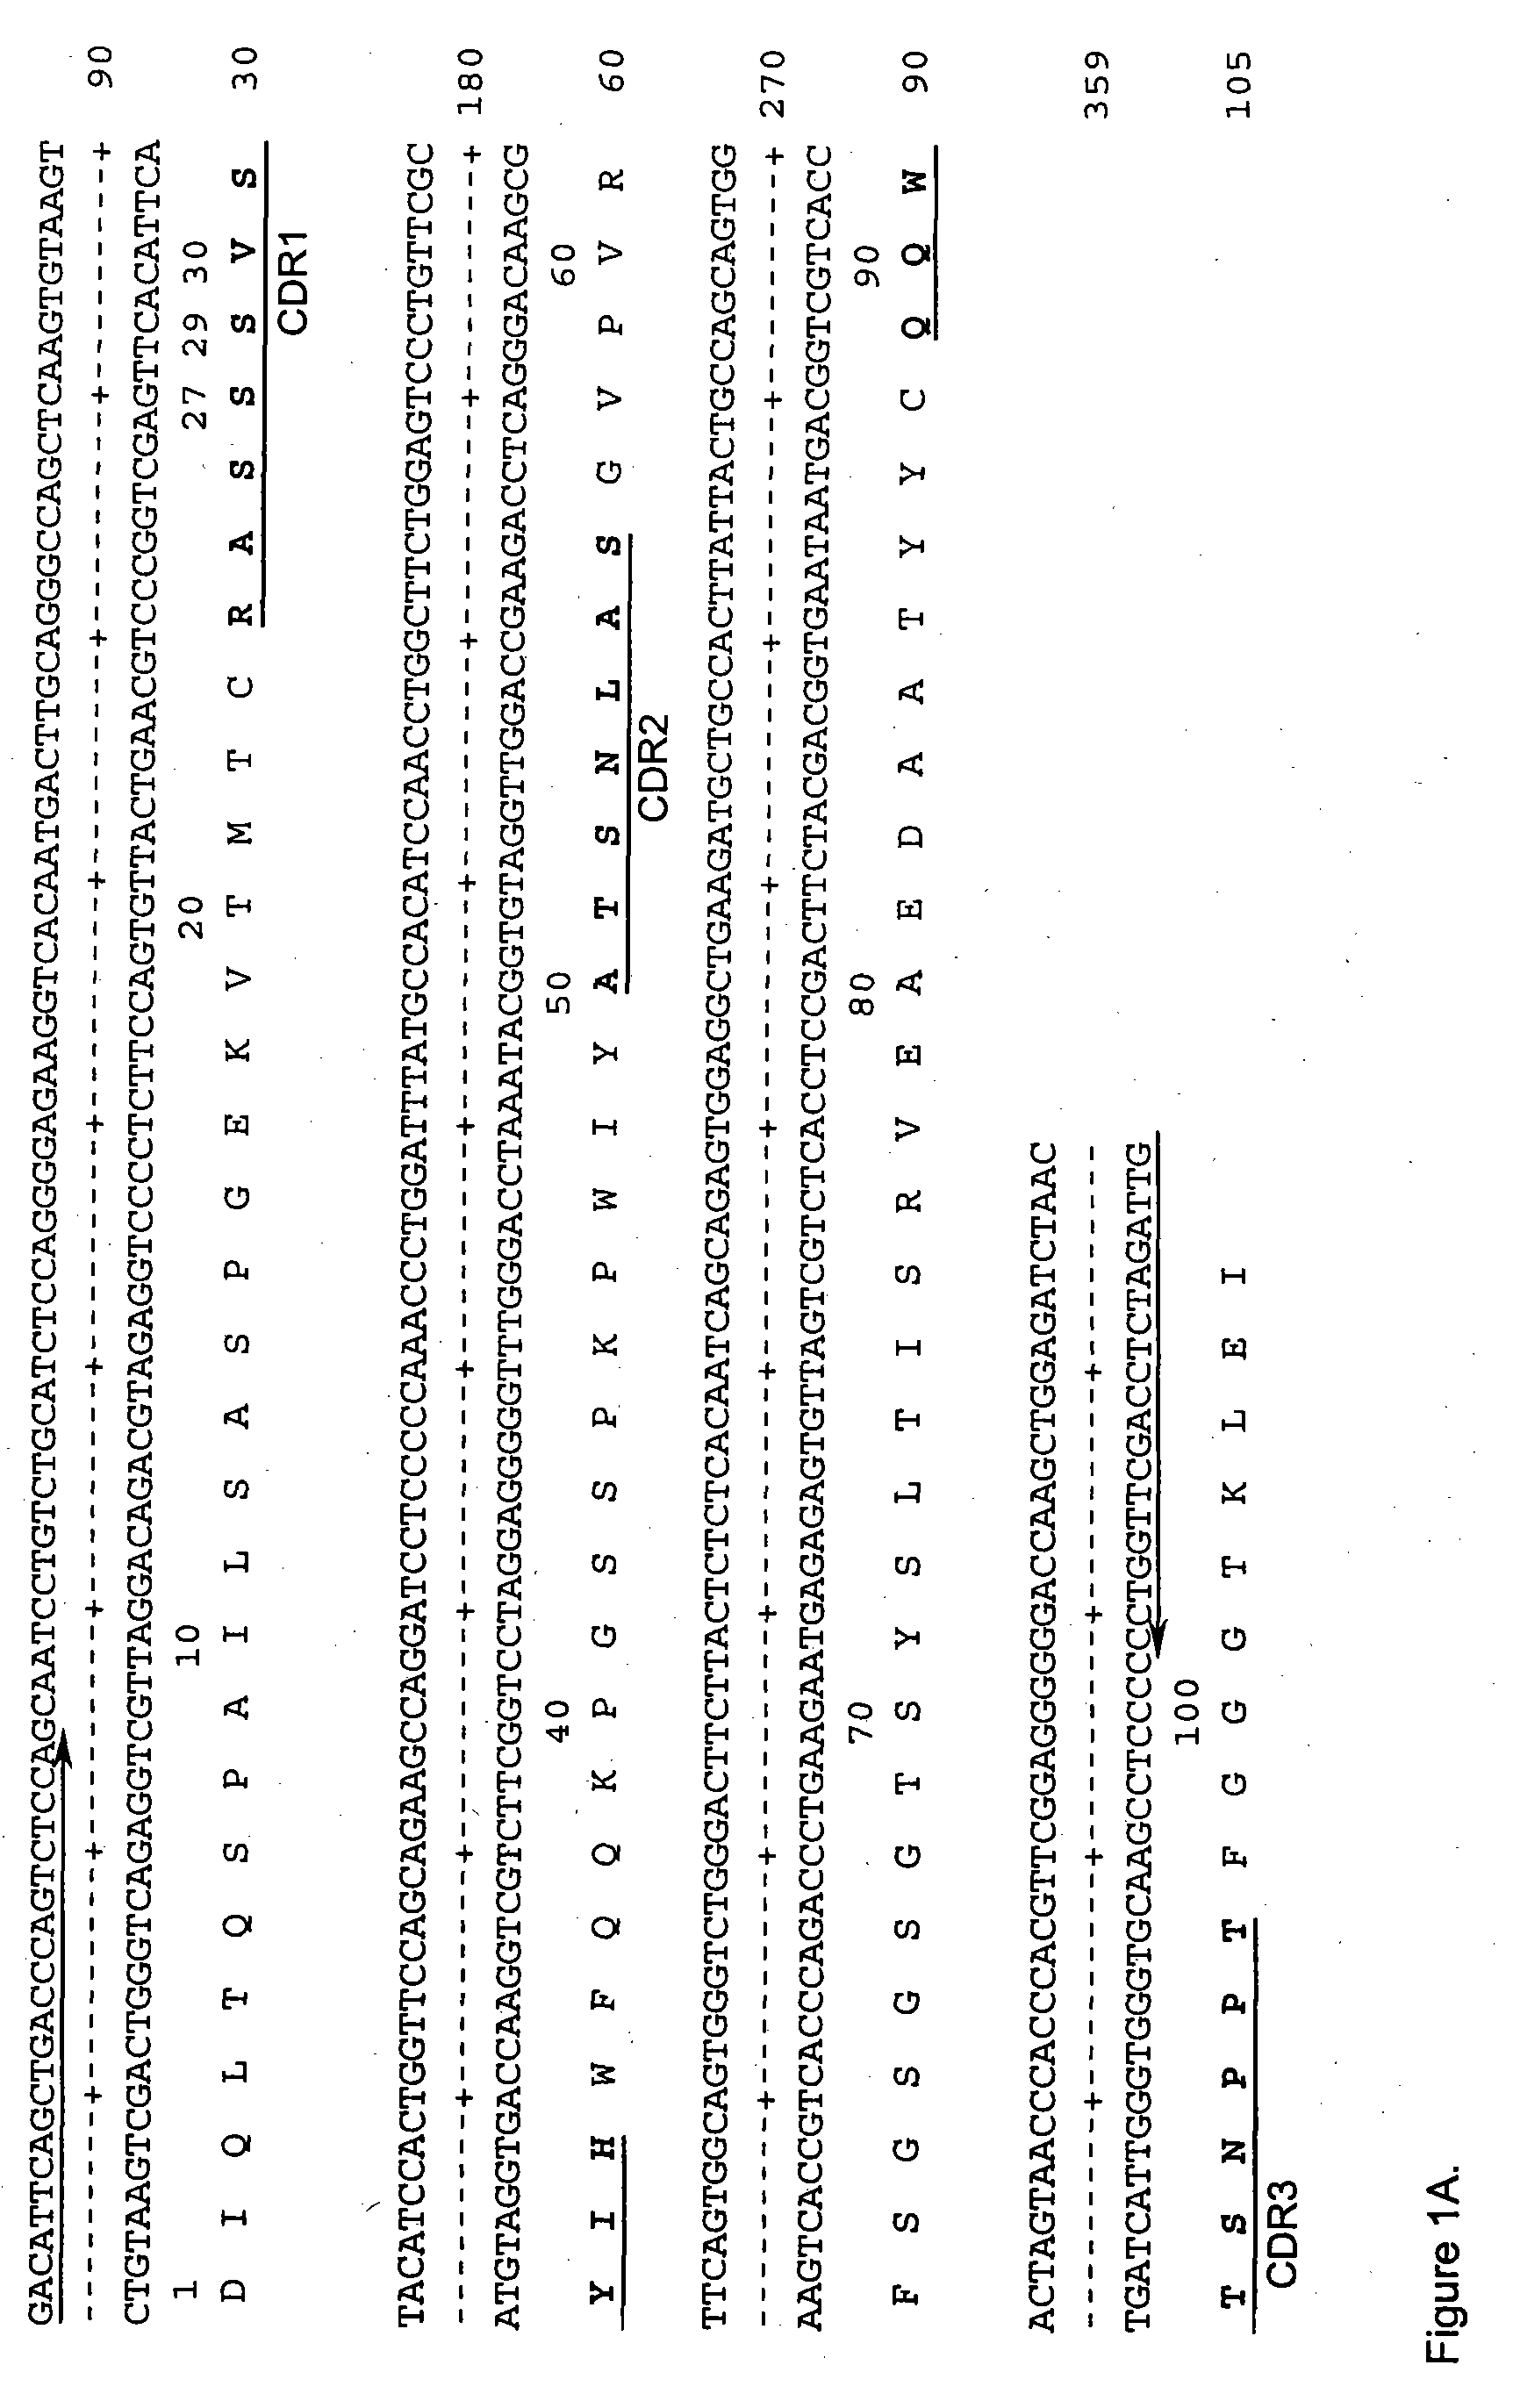 Anti-cd20 antibodies and fusion proteins thereof and methods of use